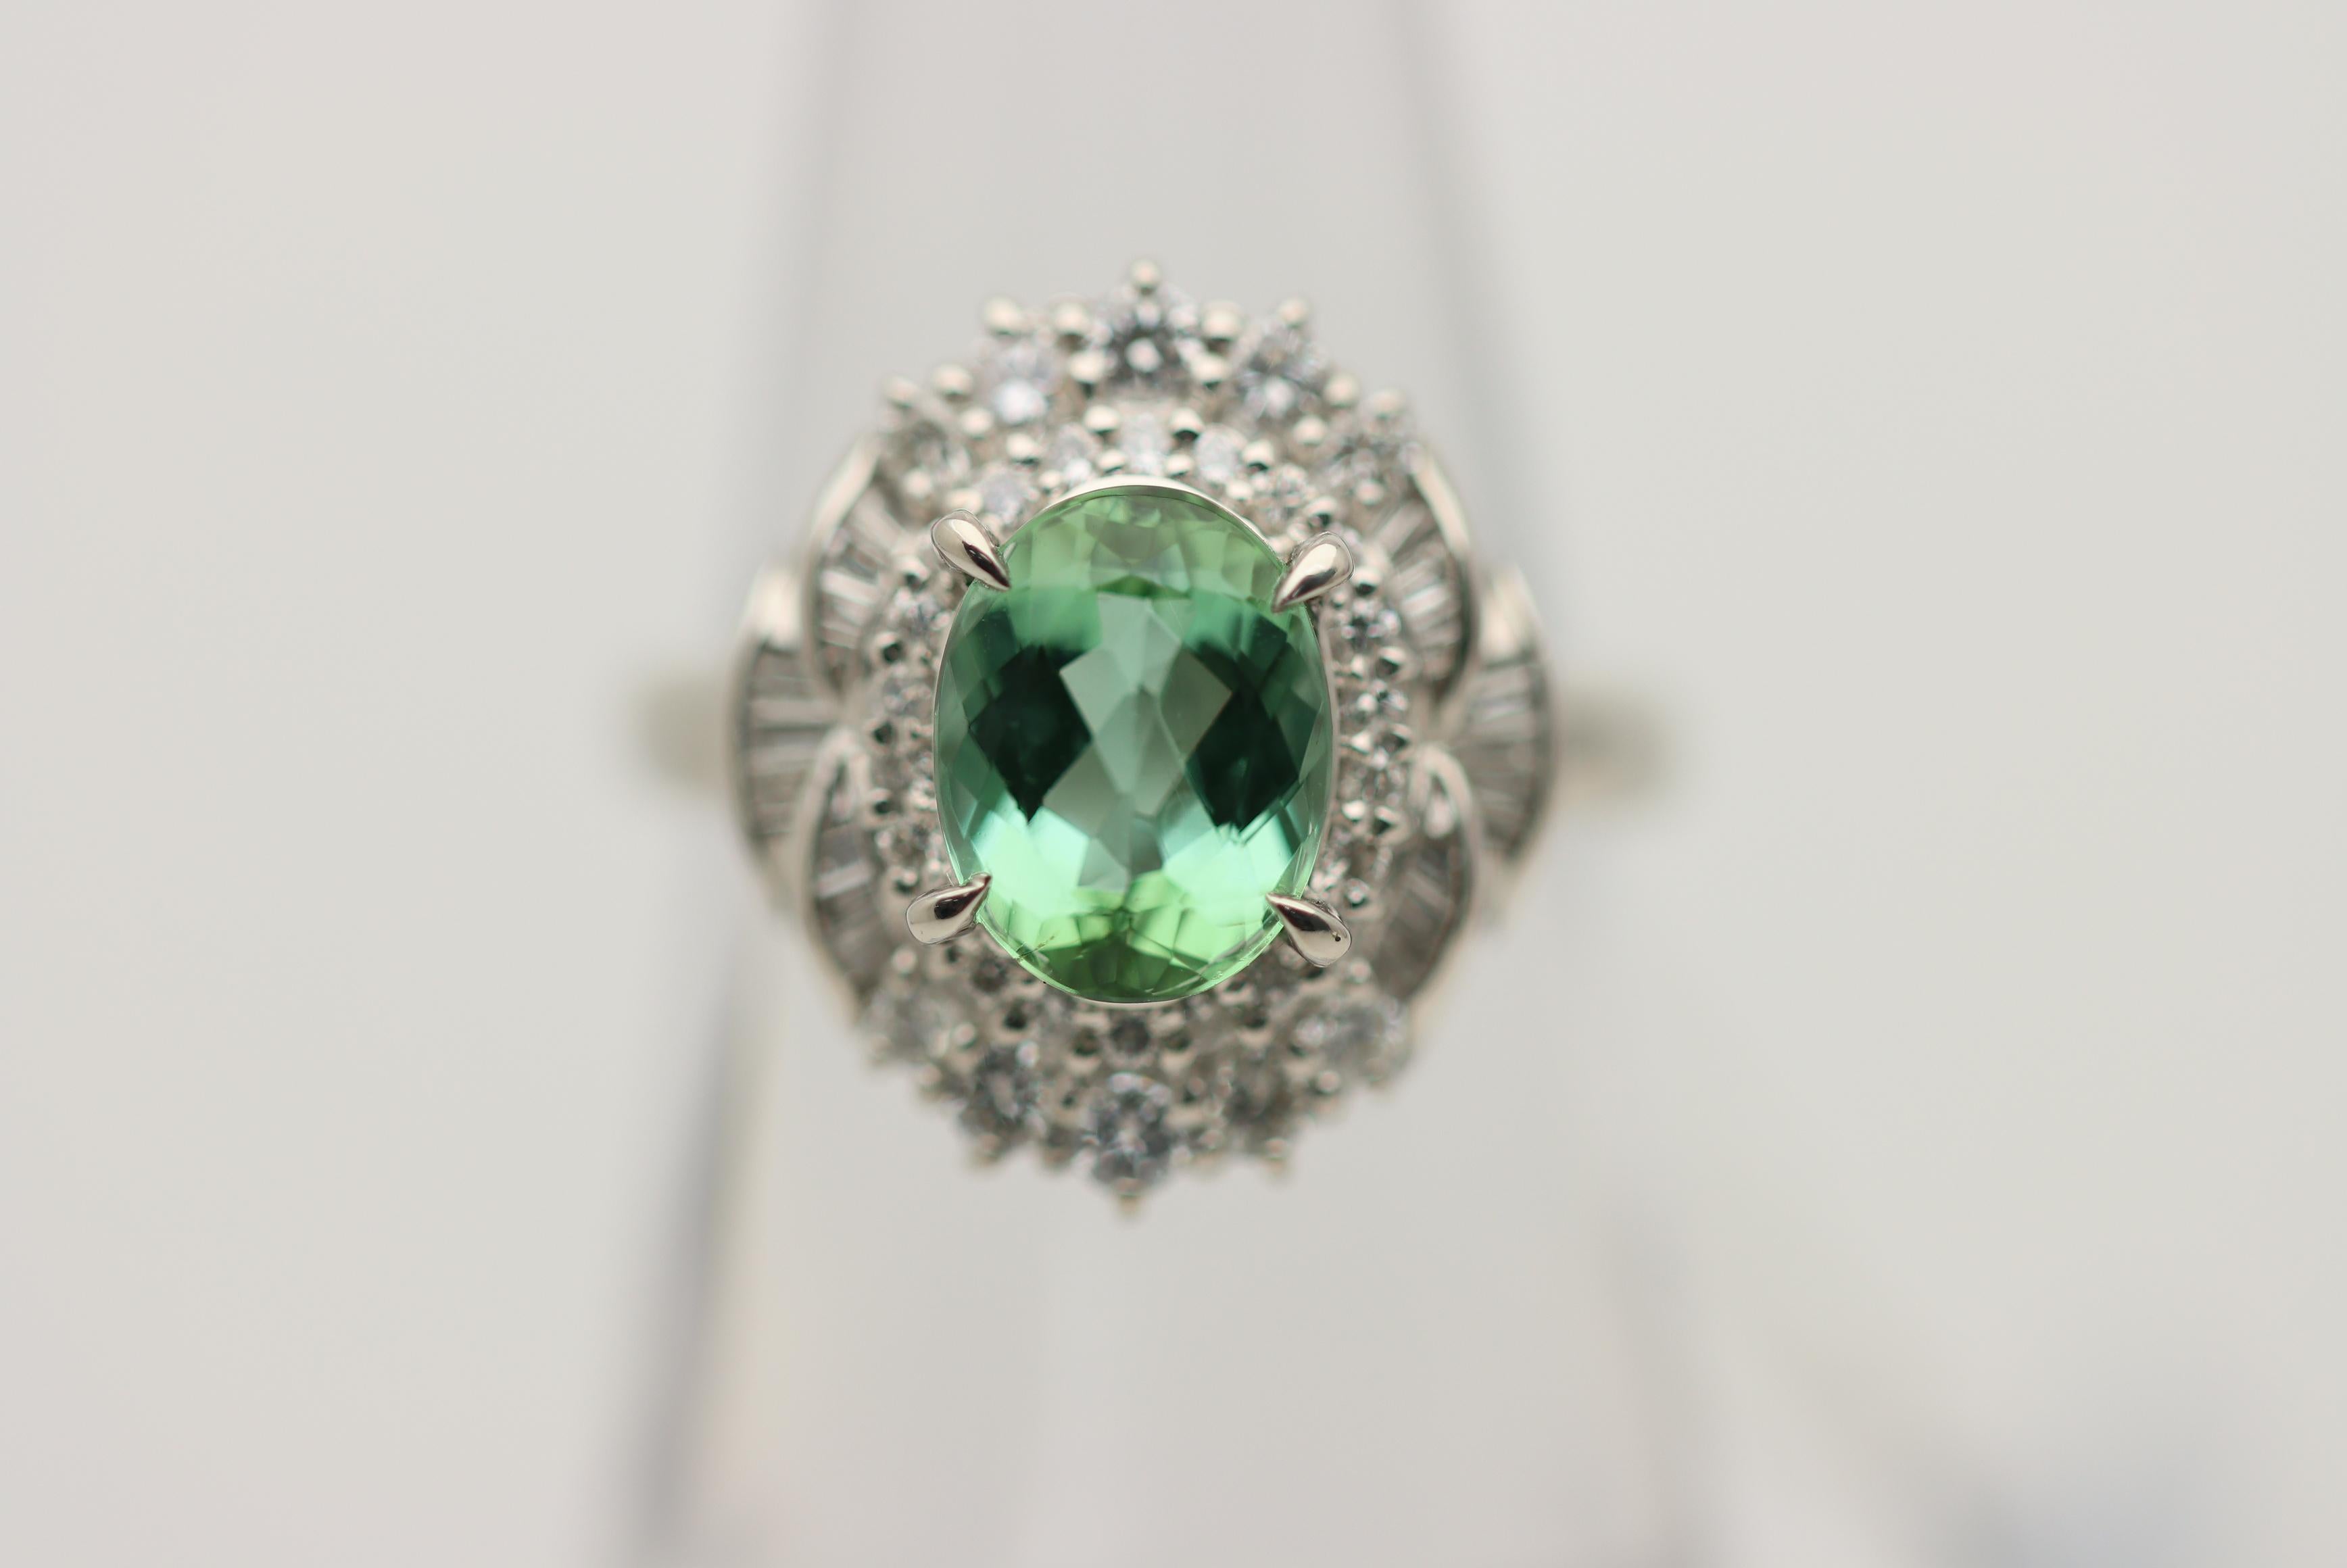 A stylish platinum ring featuring a fine gem mint tourmaline. It weighs a respectable 2.16 carats and has an intense alpine mint green color with excellent brightness and light return. It is complemented by 0.64 carats of round brilliant and